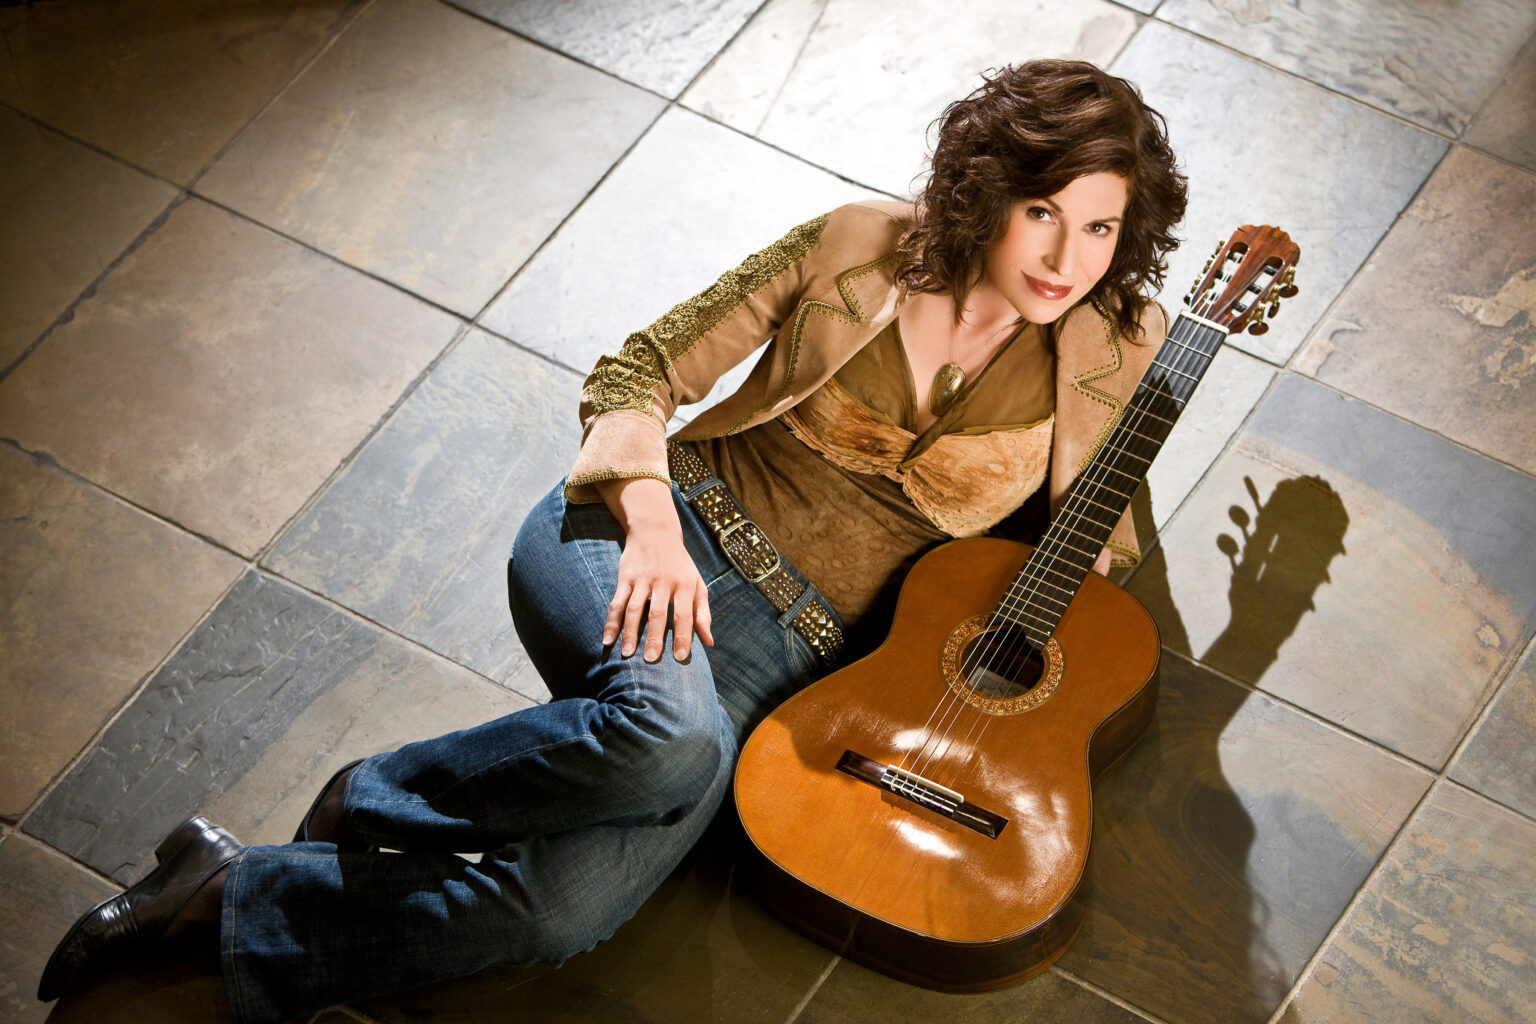 Looking up at the camera from the floor, a woman poses with a classical guitar